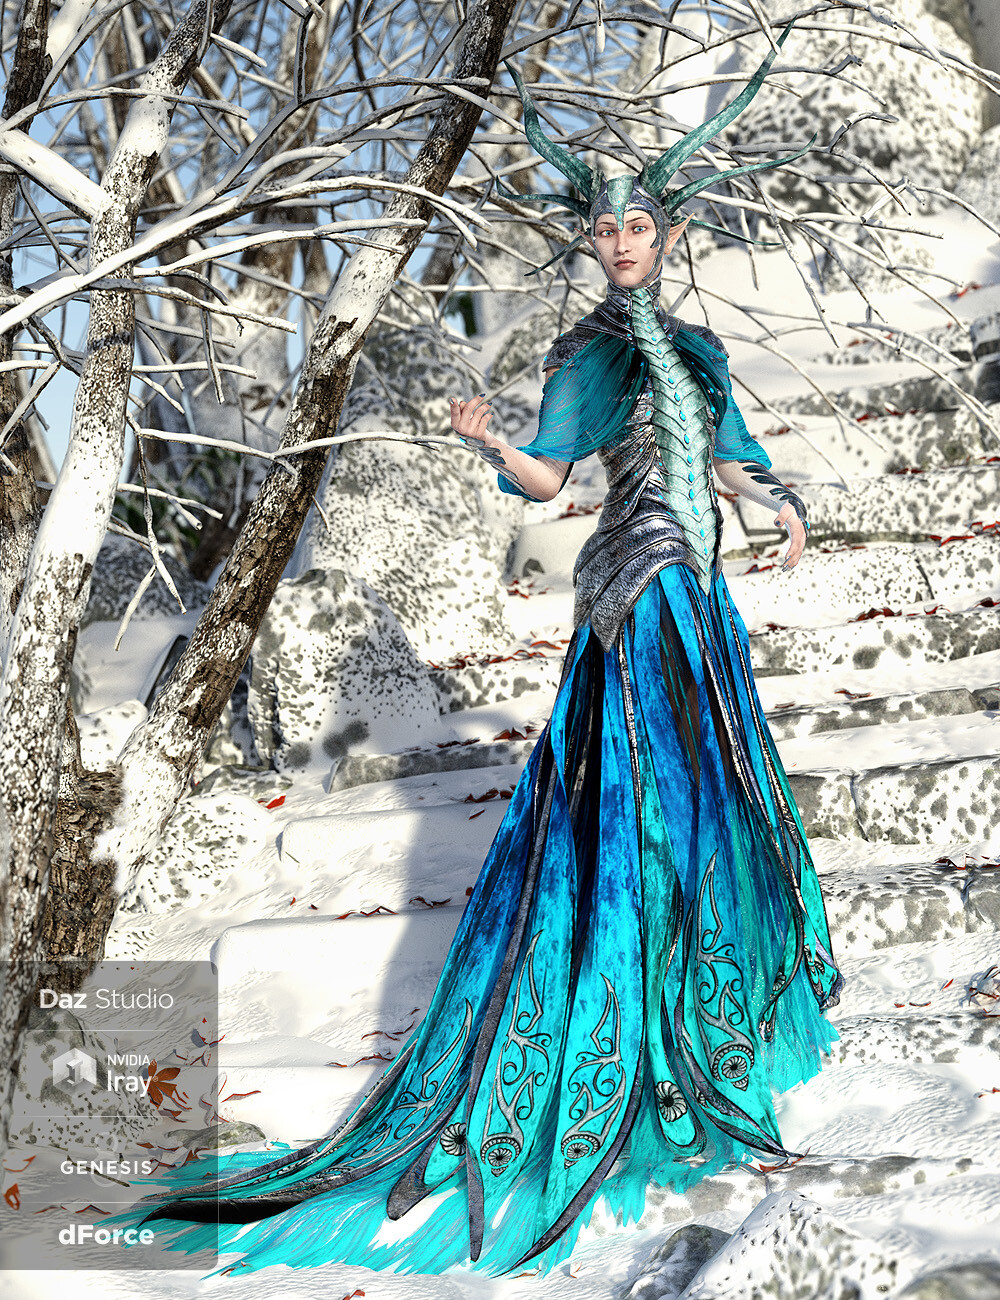 "Winter Goddess"
And a second promo for the Dragon Empress project.